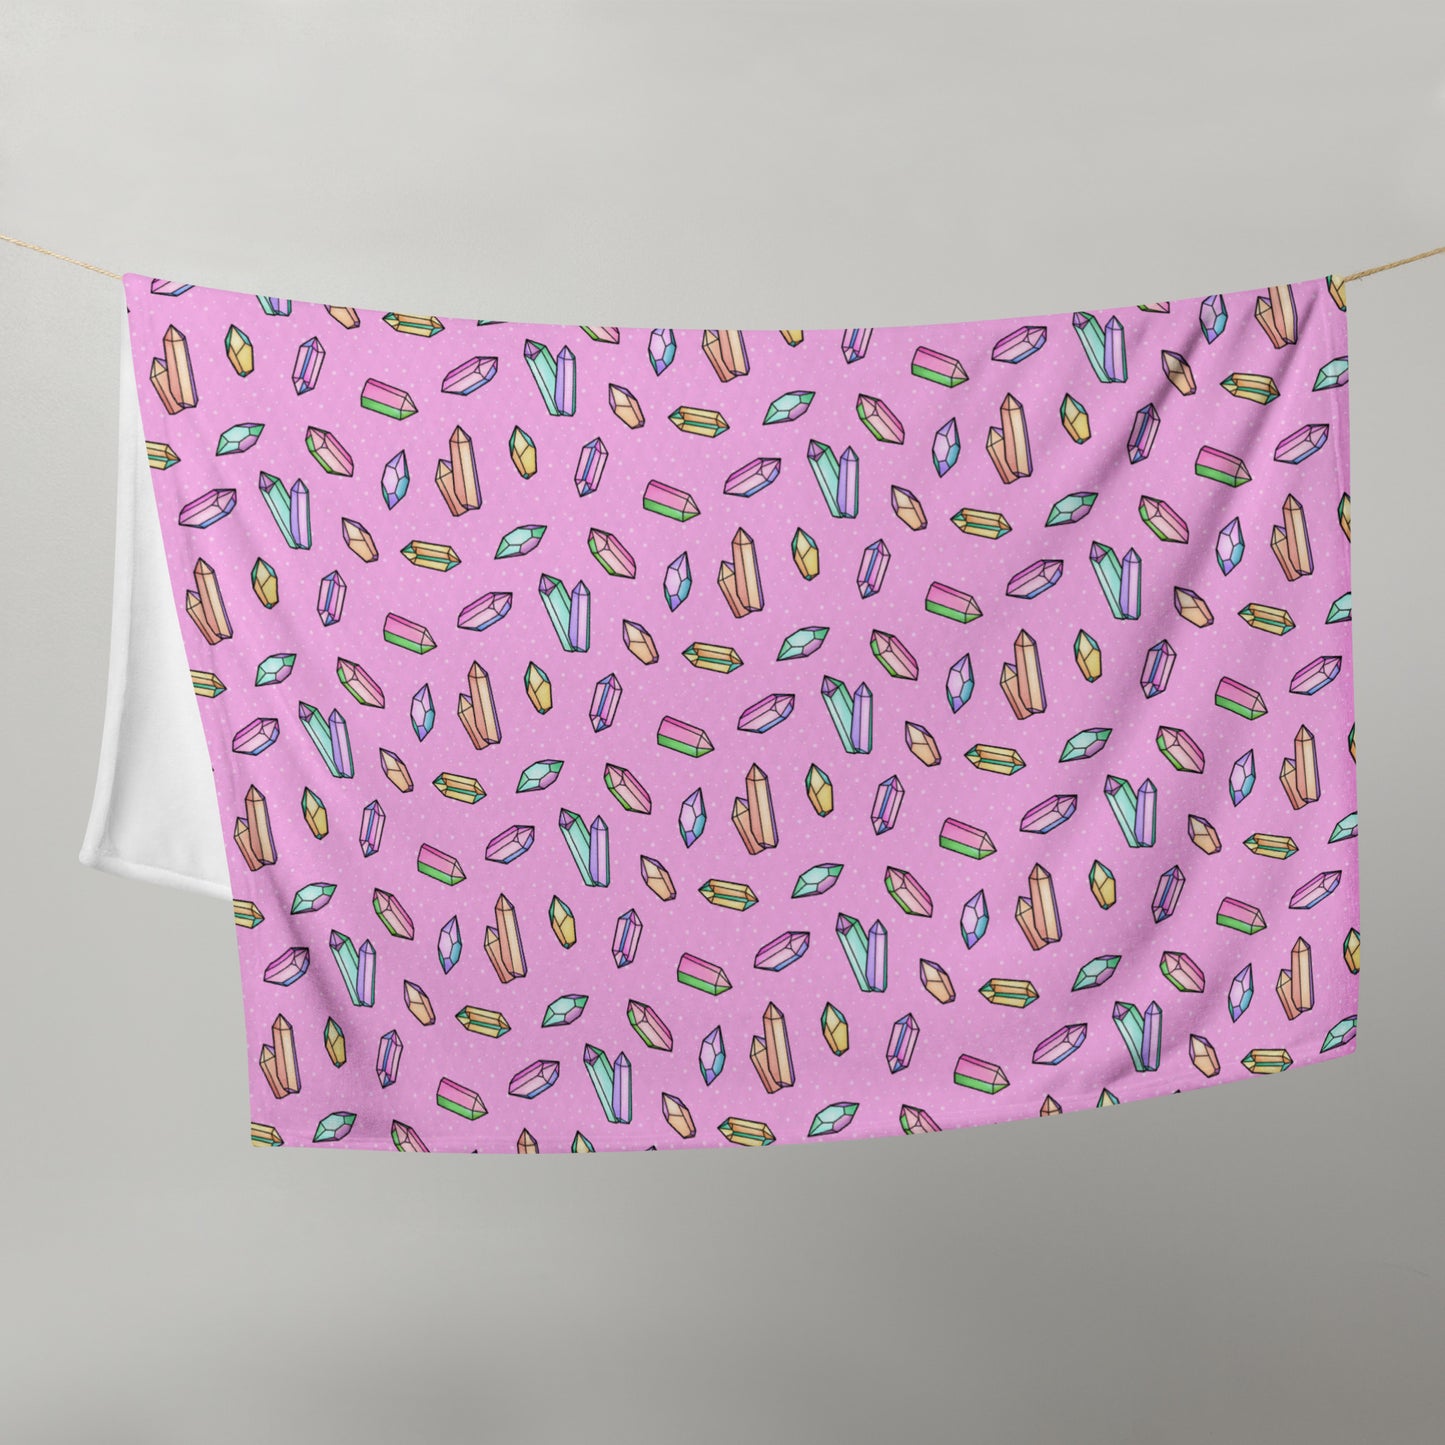 image of 50" x 60" blanket hanging in half on a clothes line to show size with repeated pattern image of rainbow crystals on a pink background